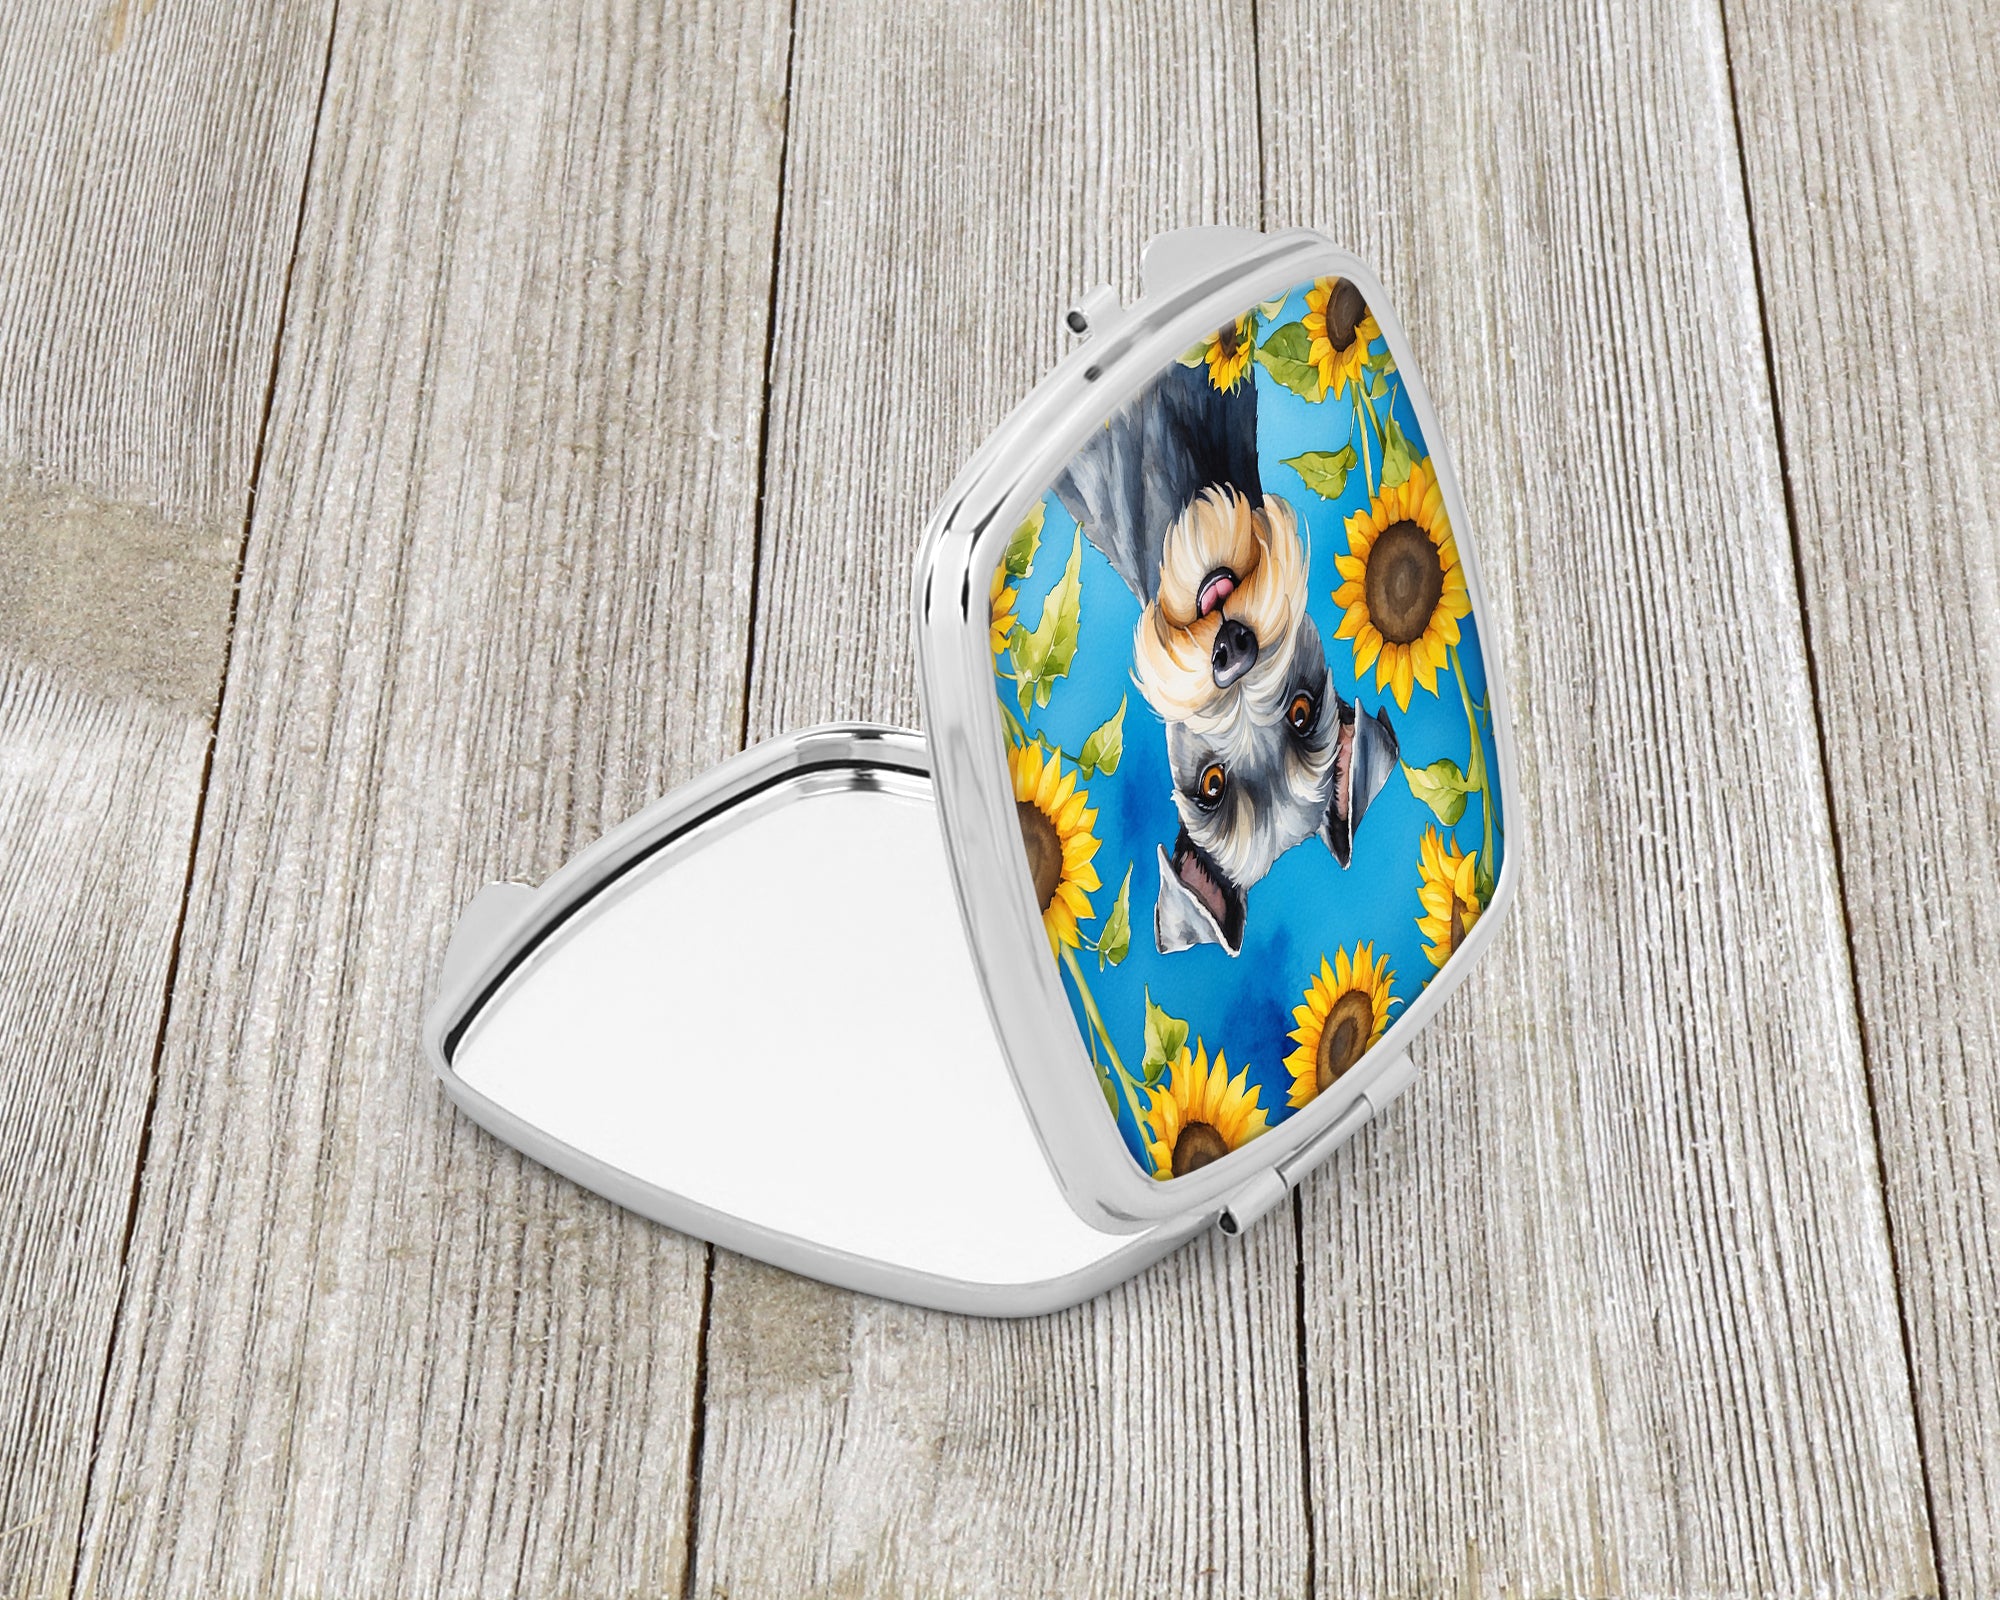 Buy this Schnauzer in Sunflowers Compact Mirror